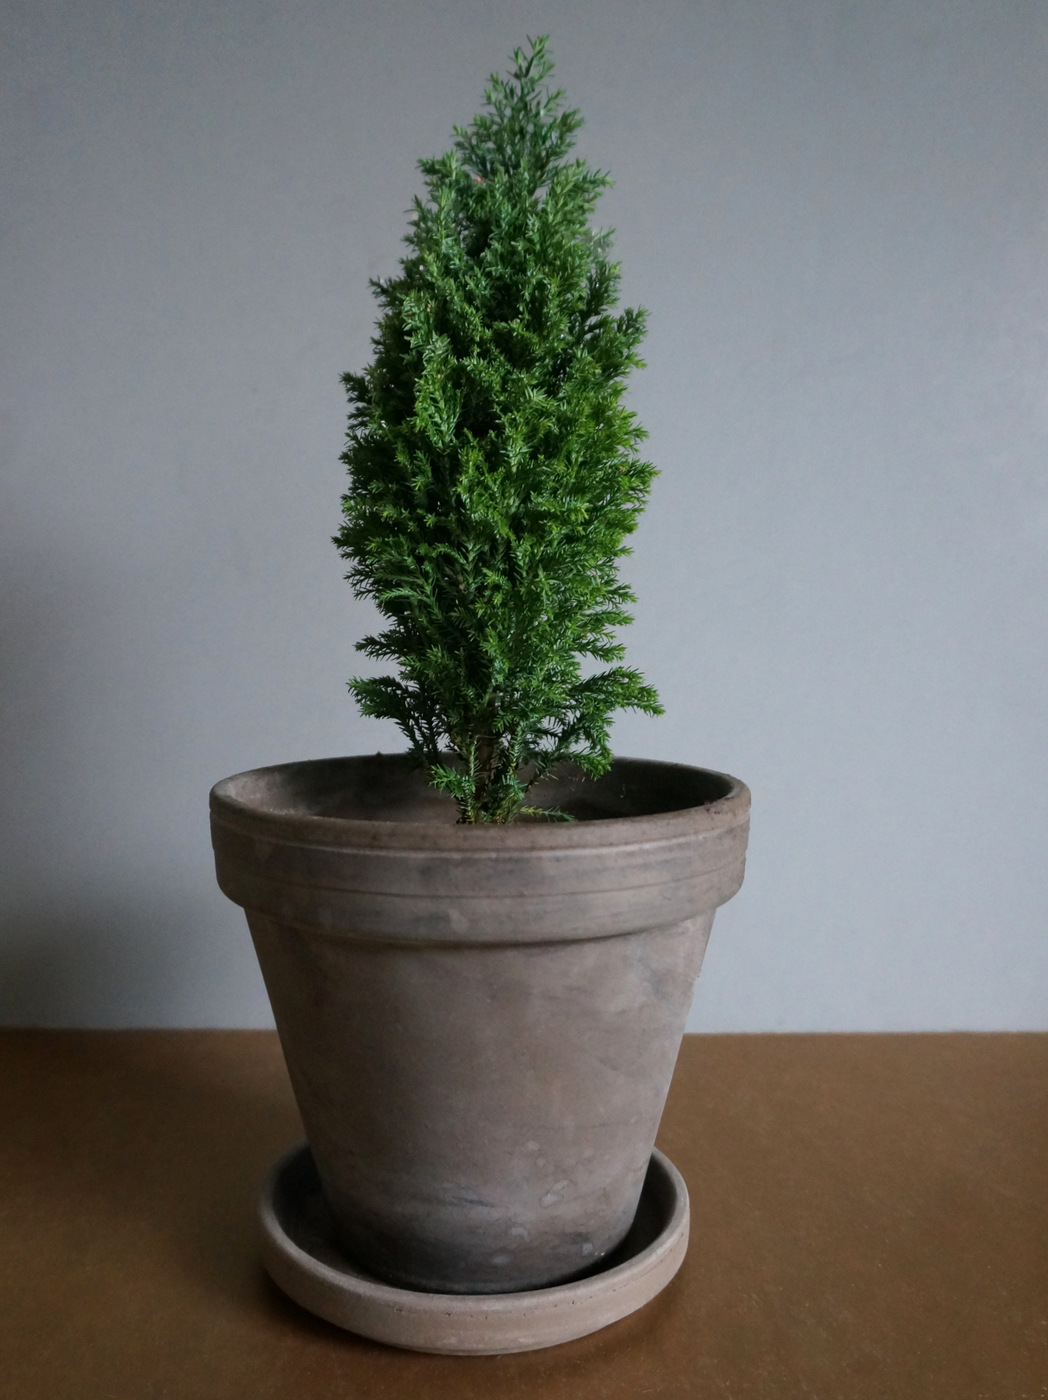 Potted holiday greenery